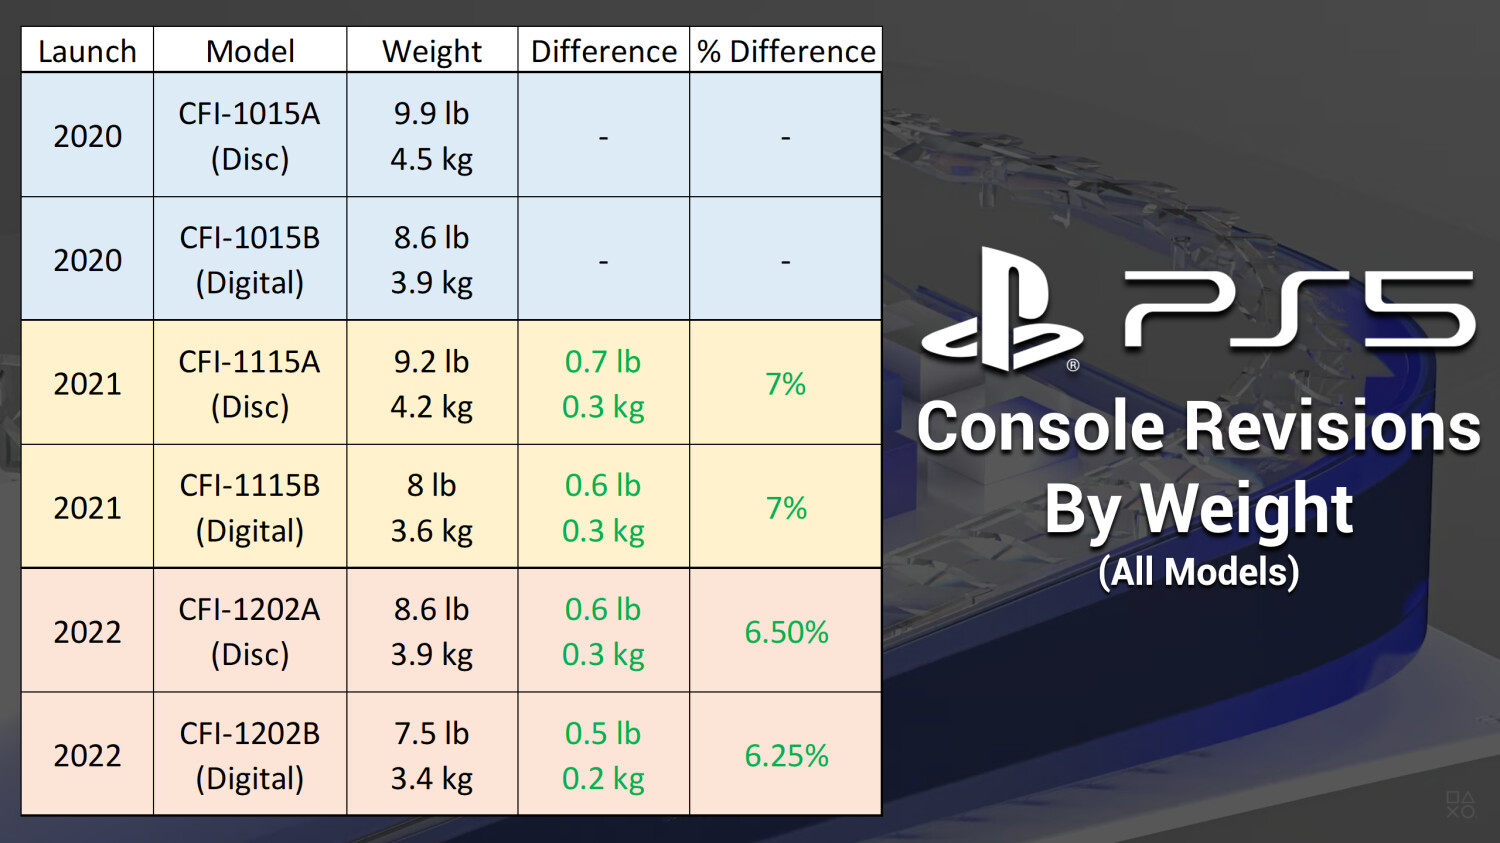 Latest PlayStation 5 Hardware Revision nm "Oberon Plus" SoC to Weight | TechPowerUp